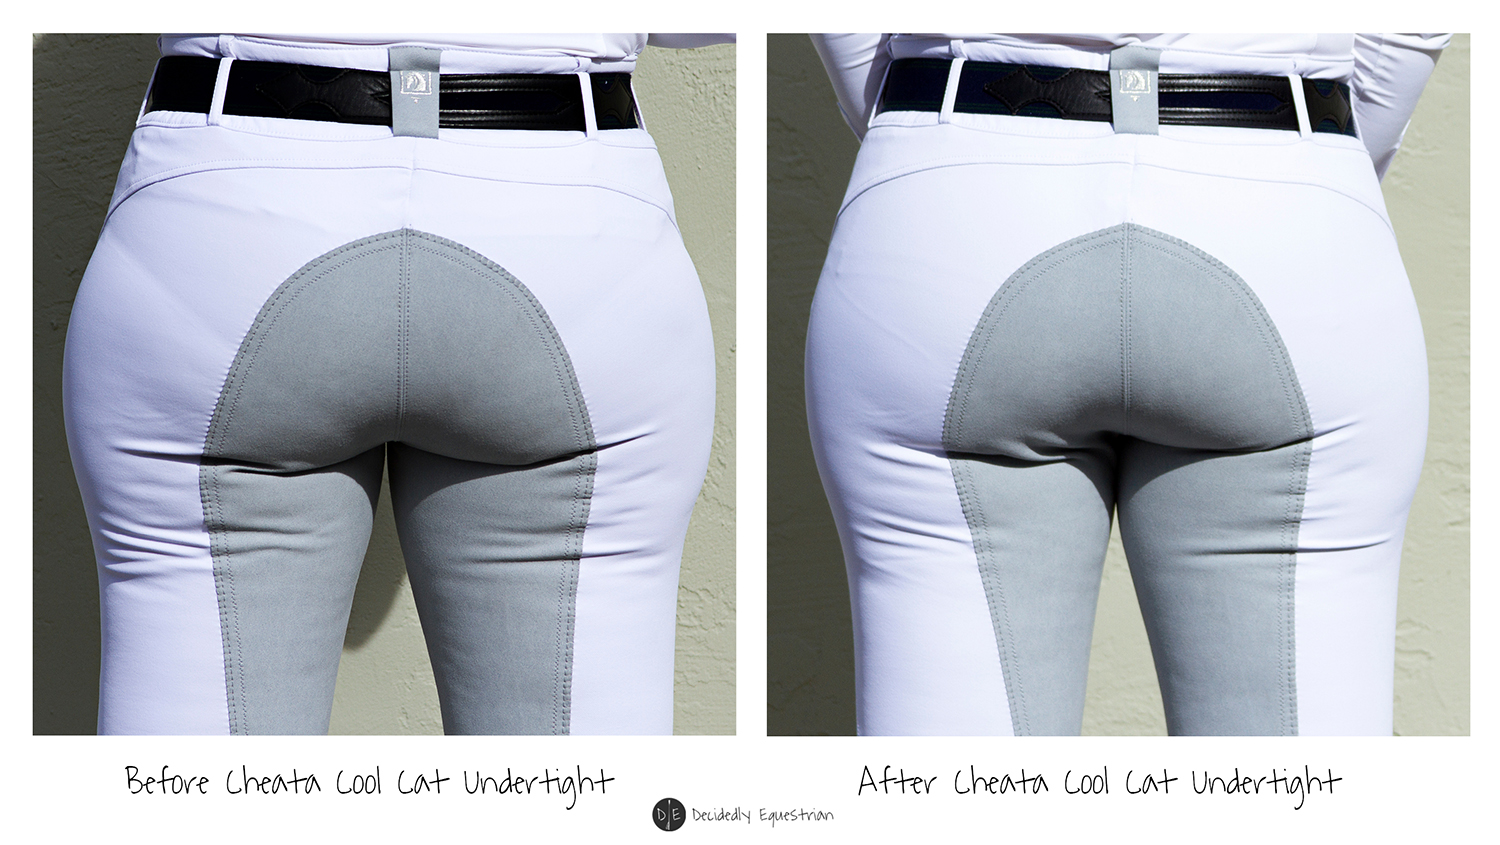 Cheata Cool Cat Undertight Review Side by Side 1